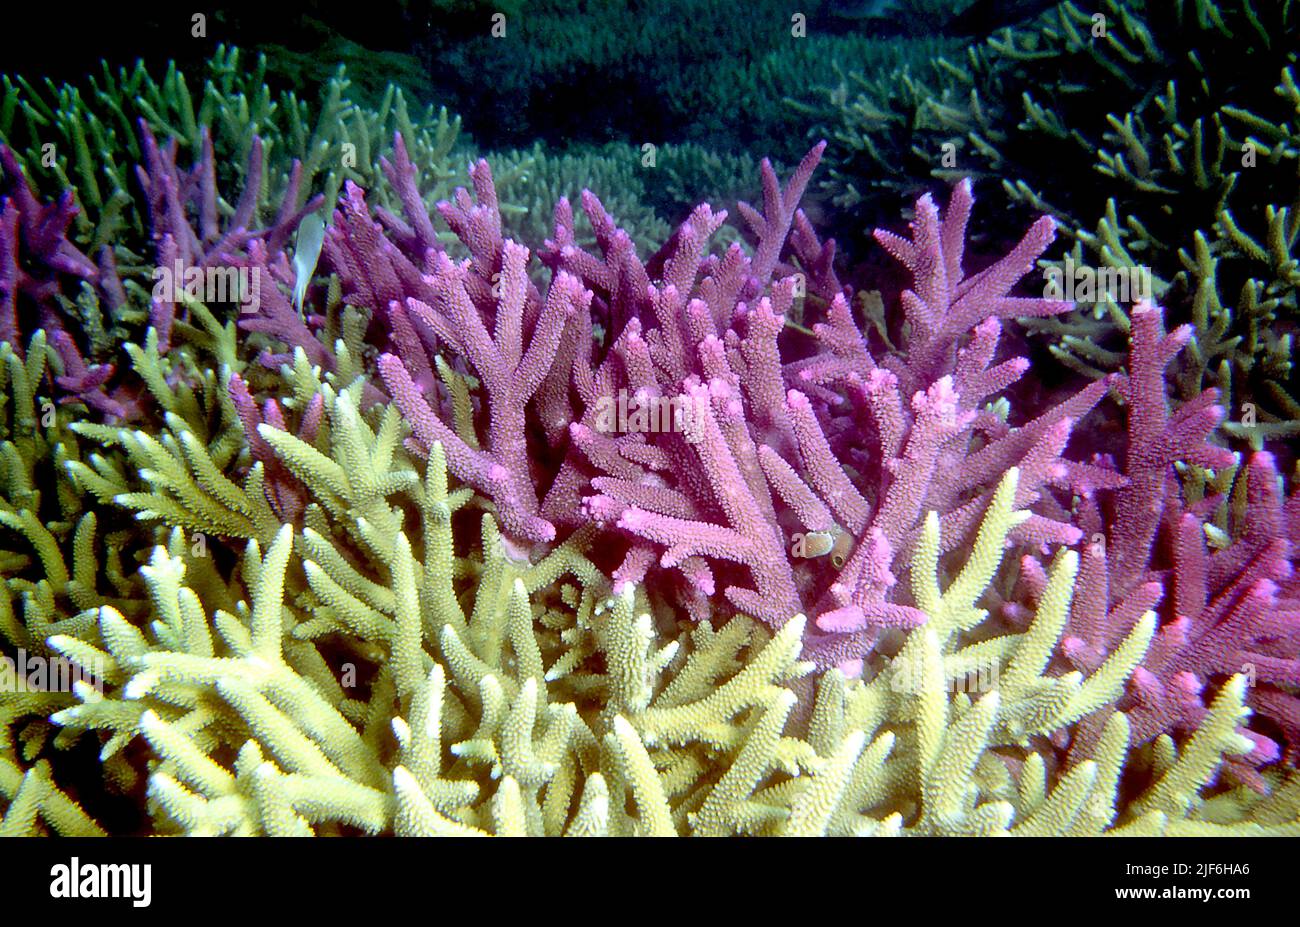 Staghorn corals, Acropora formosa (pink) growing entangled with Acropora nobilis (cream). These species often grow together. Photo from Whitsunday Isl Stock Photo